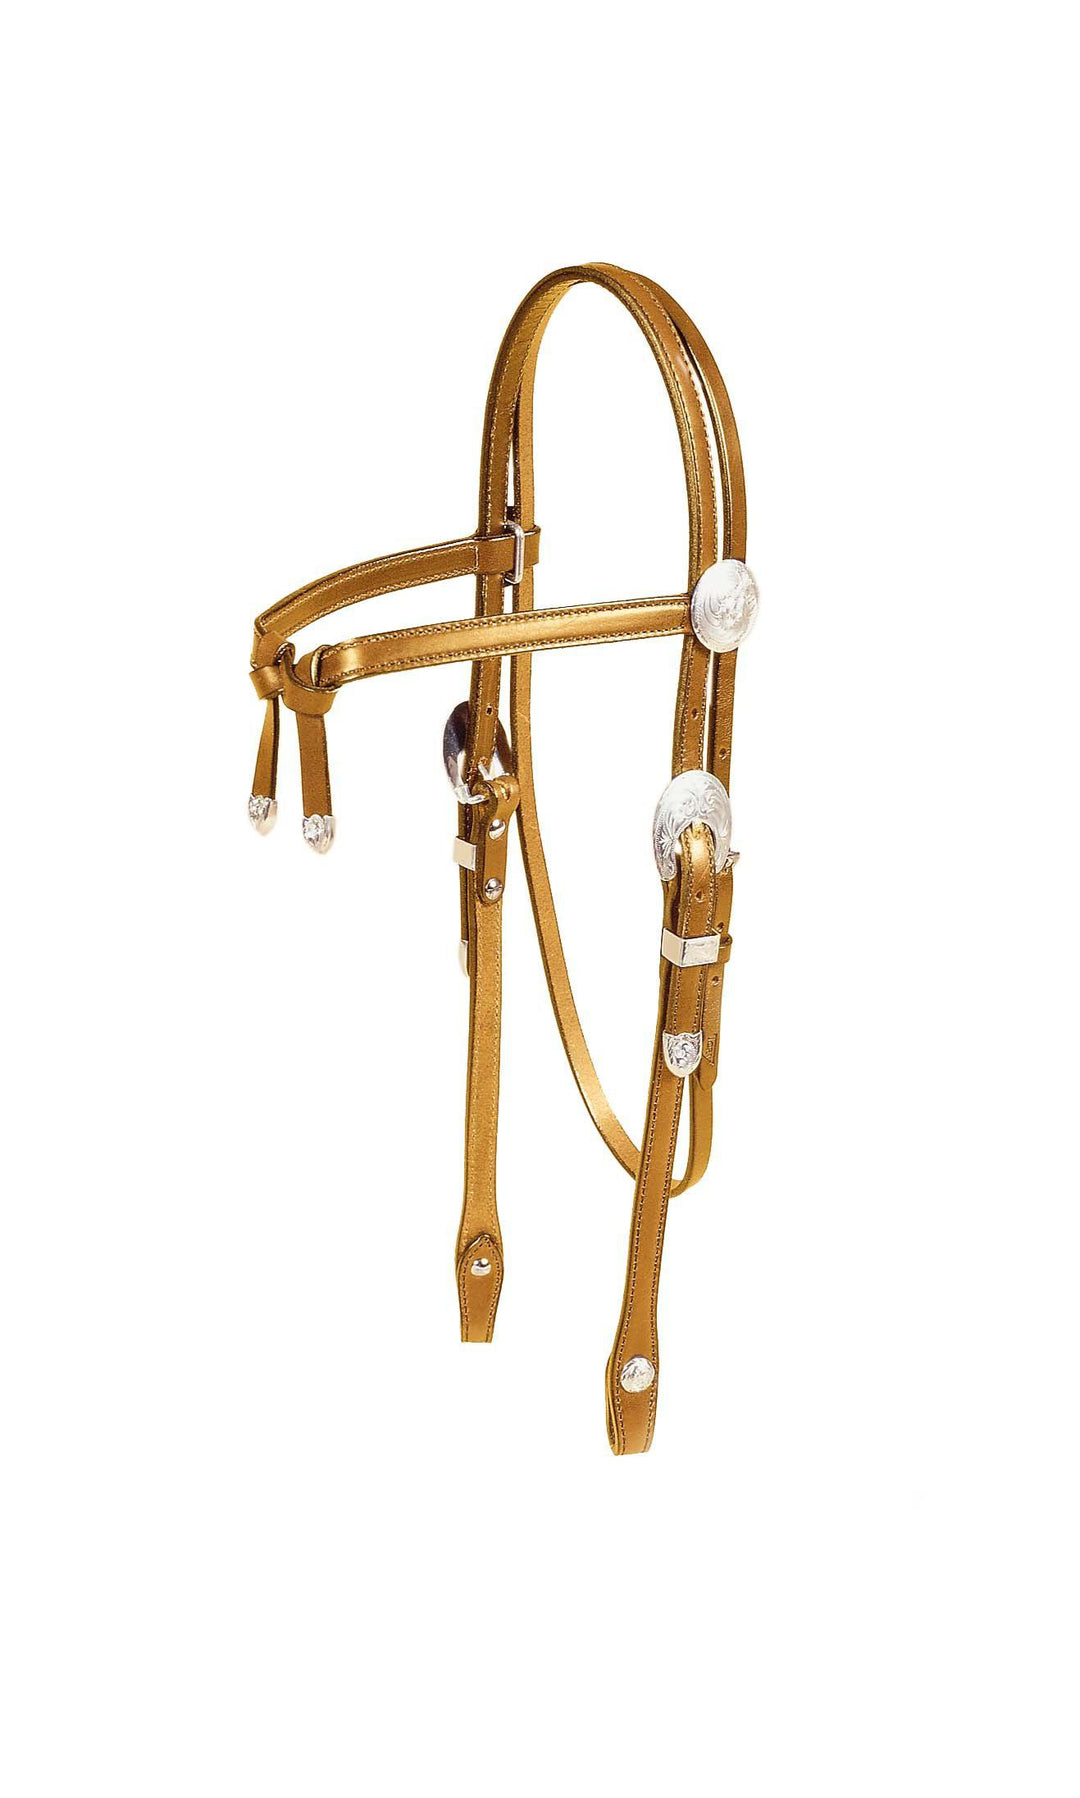 Tory Leather Oklahoma Knotted Brow Show Headstall - West 20 Saddle Co.